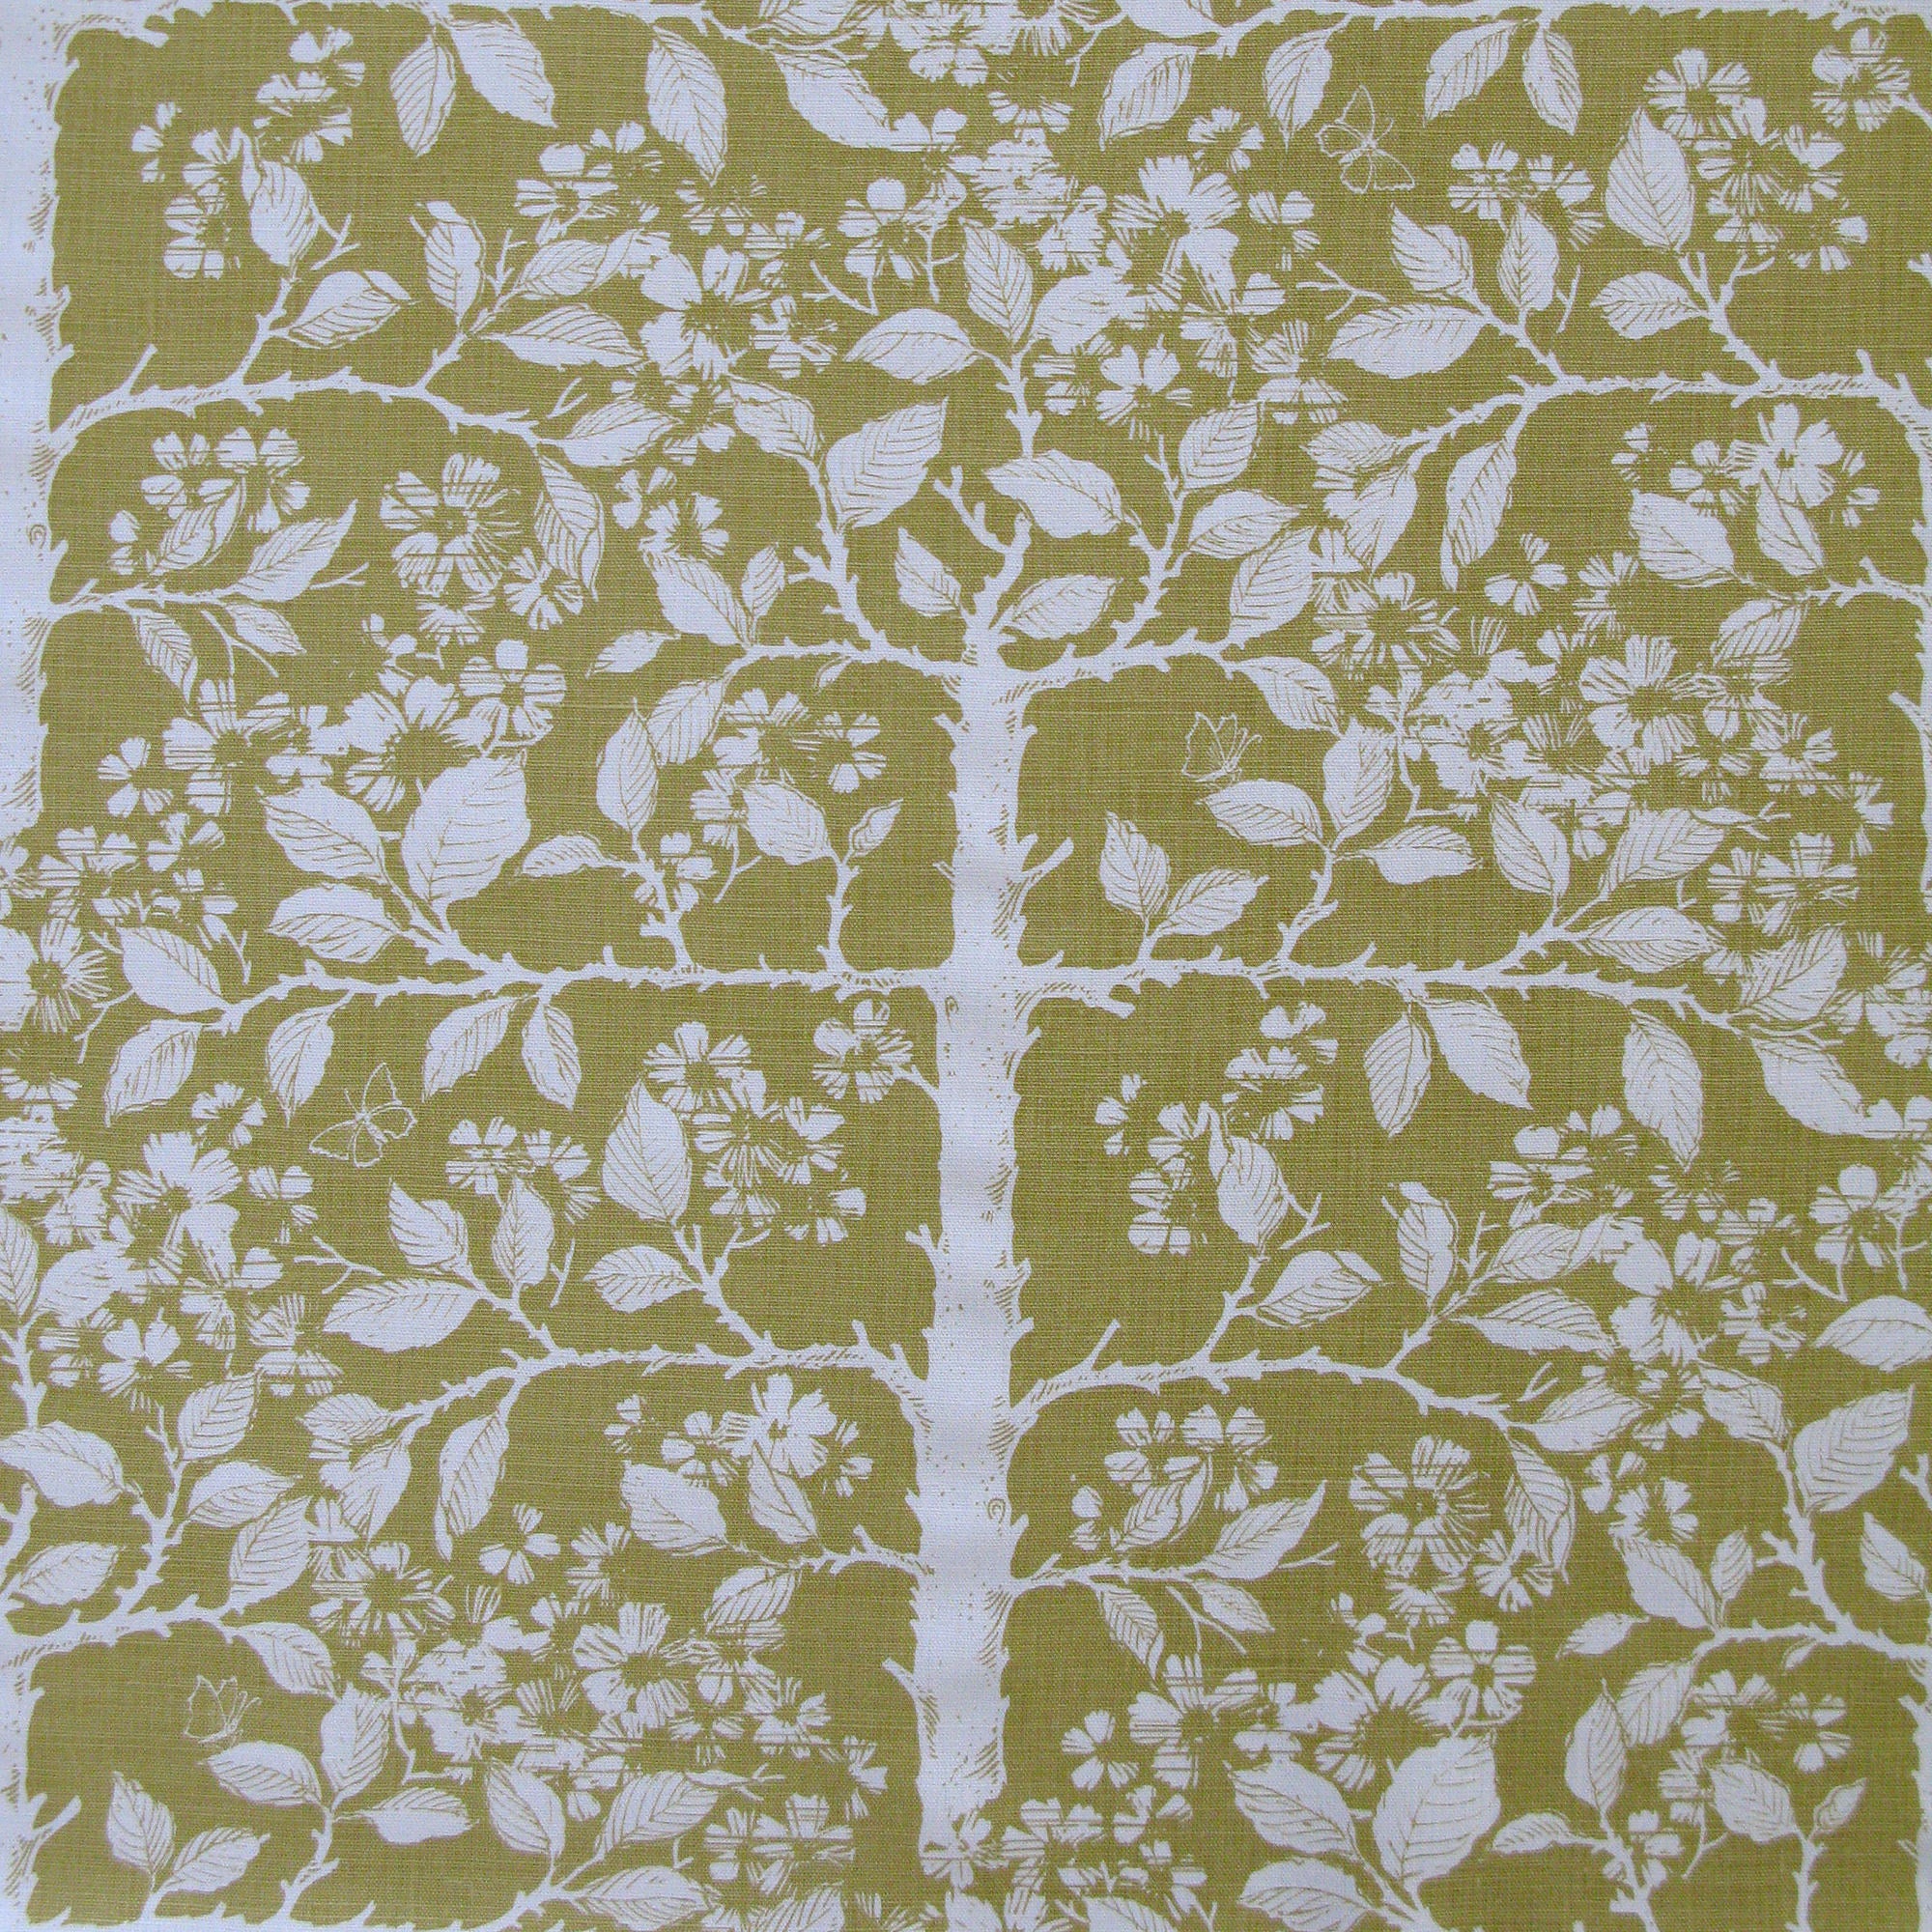 Detail of fabric in a large-scale tree and leaf print in white on an olive field.